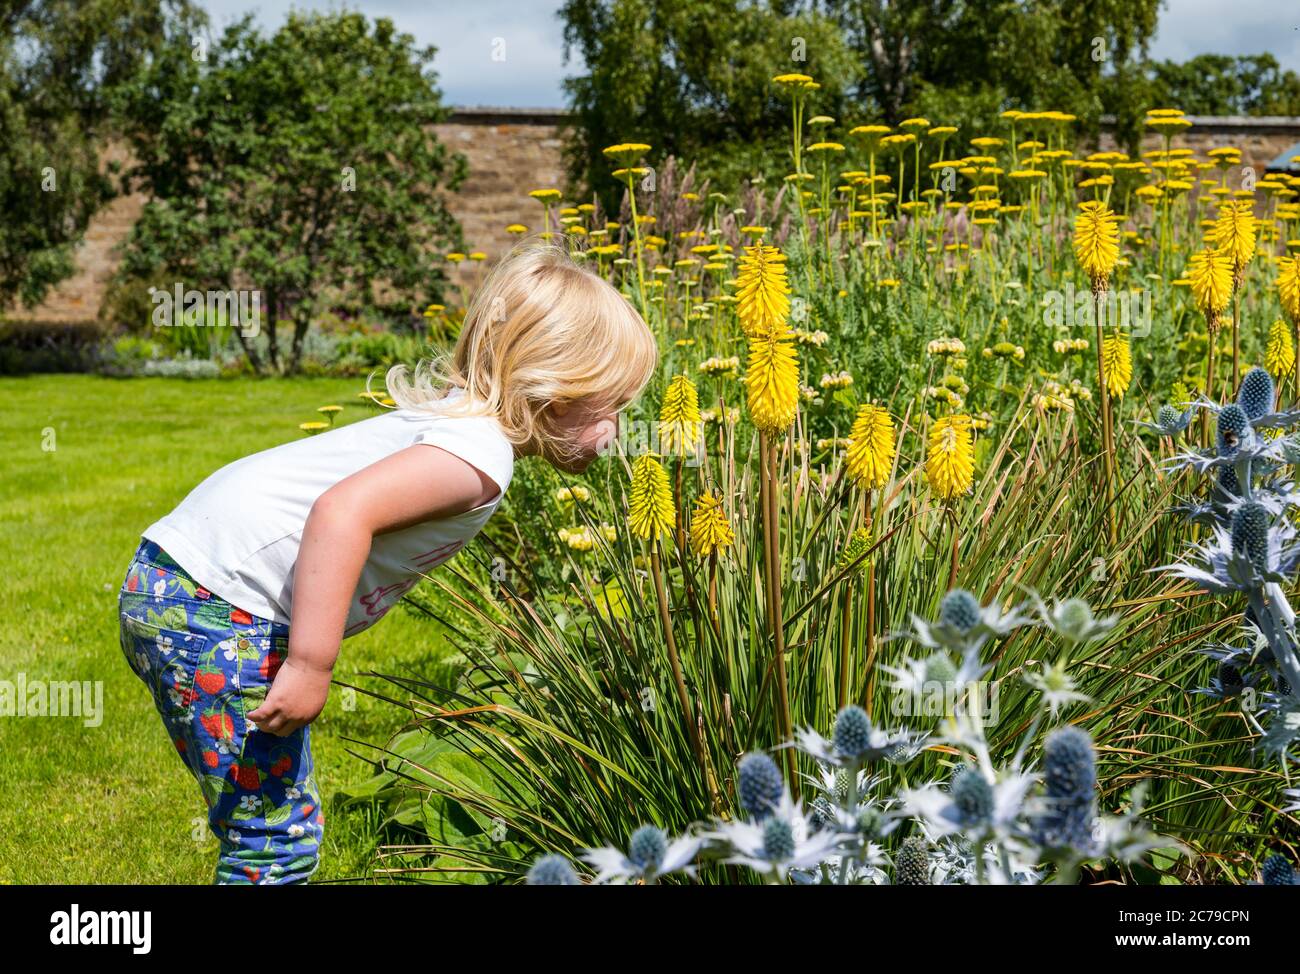 Haddington, East Lothian, Scotland, UK, 15th July 2020. Amisfield Walled Garden reopens: 18th century garden, one of the largest in Scotland.  It is now open 3 days a week with an online booking system after lockdown restrictions eased during the Covid-19 pandemic. Joni, aged 3 years, smells the colourful flowers including yellow red hot poker plants or lemon torch lilies (tritoma) and sea holly (Eryngium) in the Summer sunshine Stock Photo